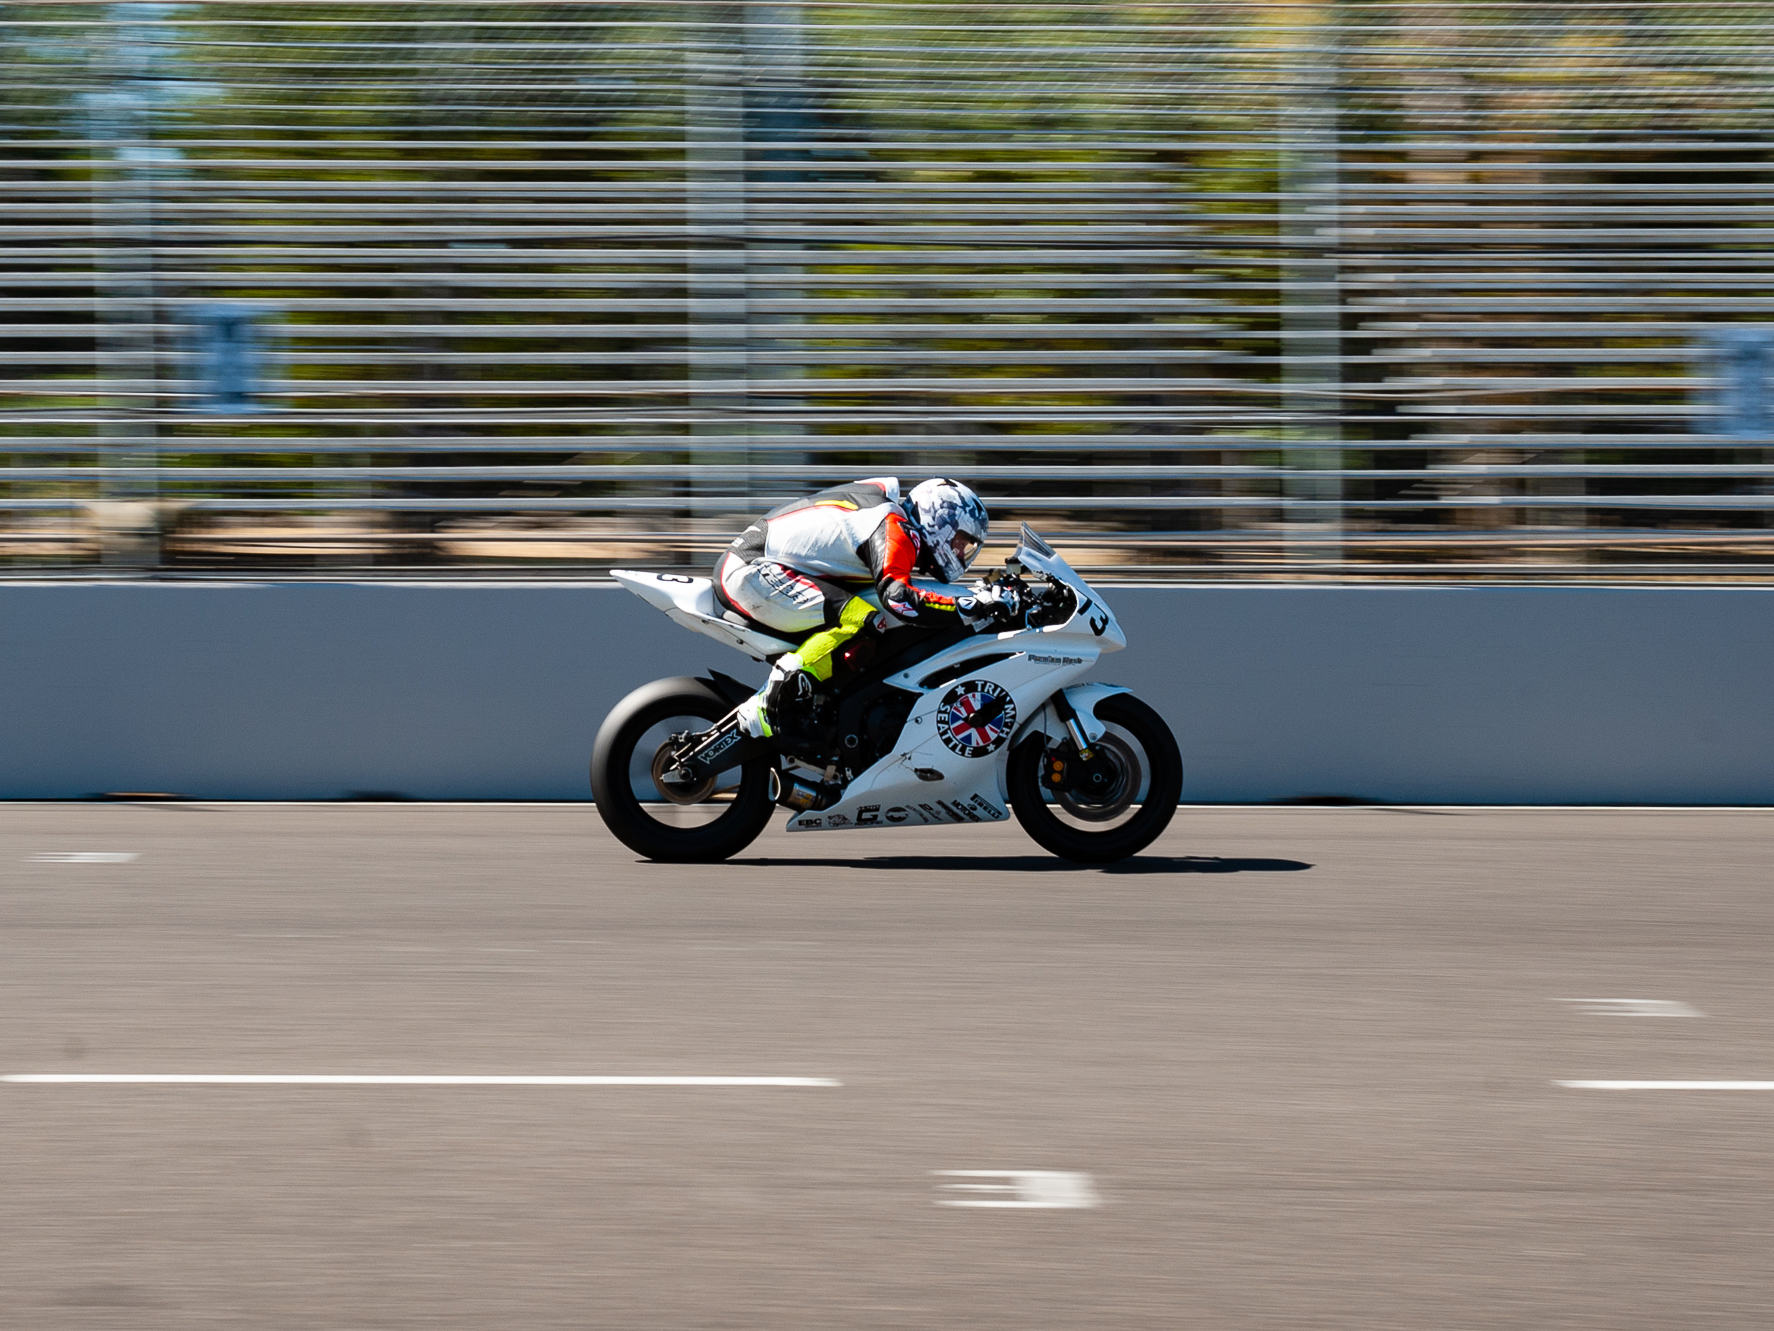 Used KTM Super Duke racing on track with motion blurred background